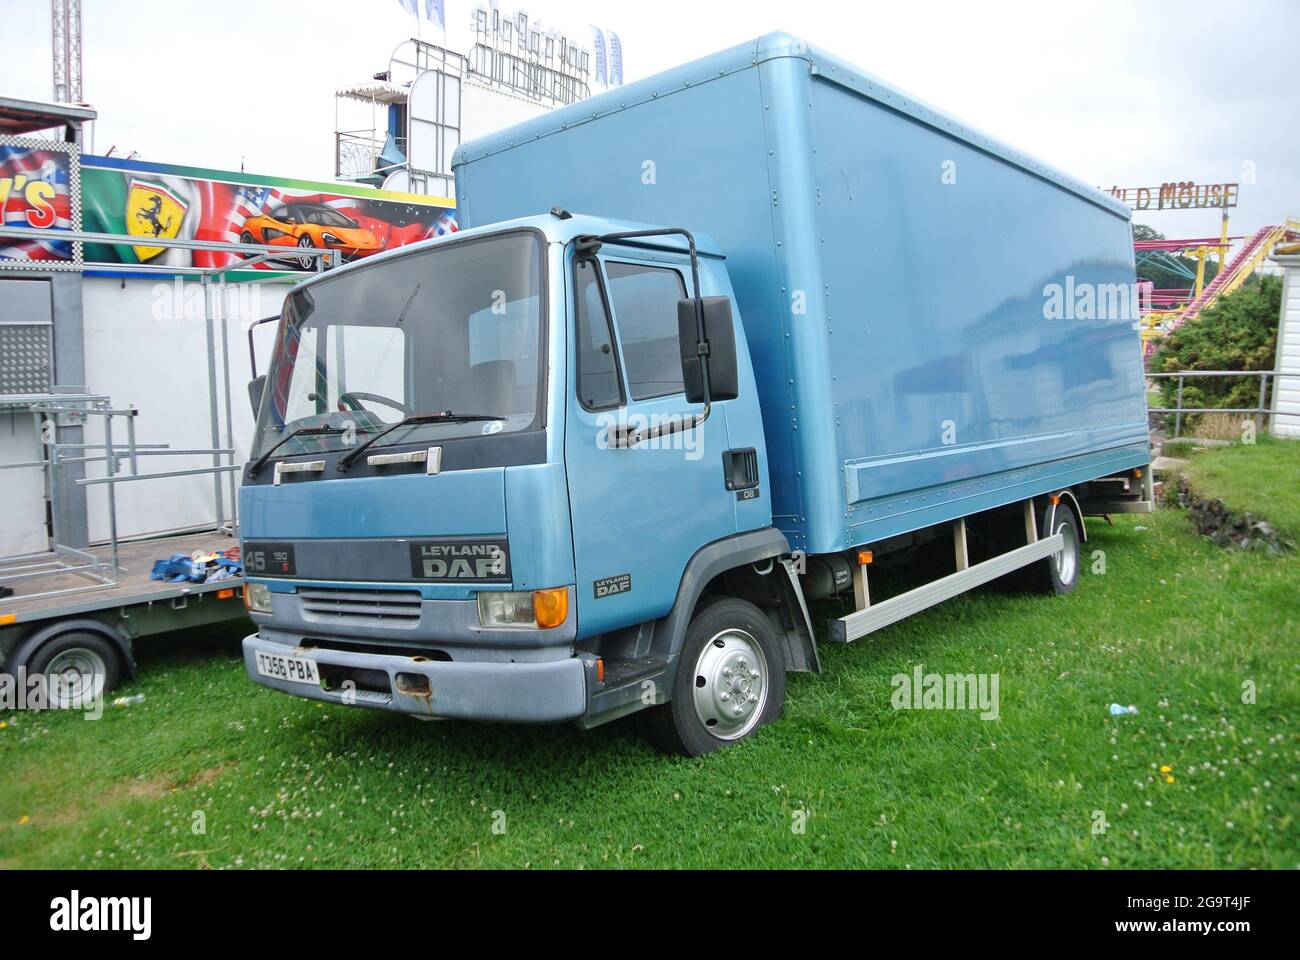 A Leyland DAF lorry parked up at Anderton and Rowlands Fair, Paignton, Devon, England, UK. Stock Photo